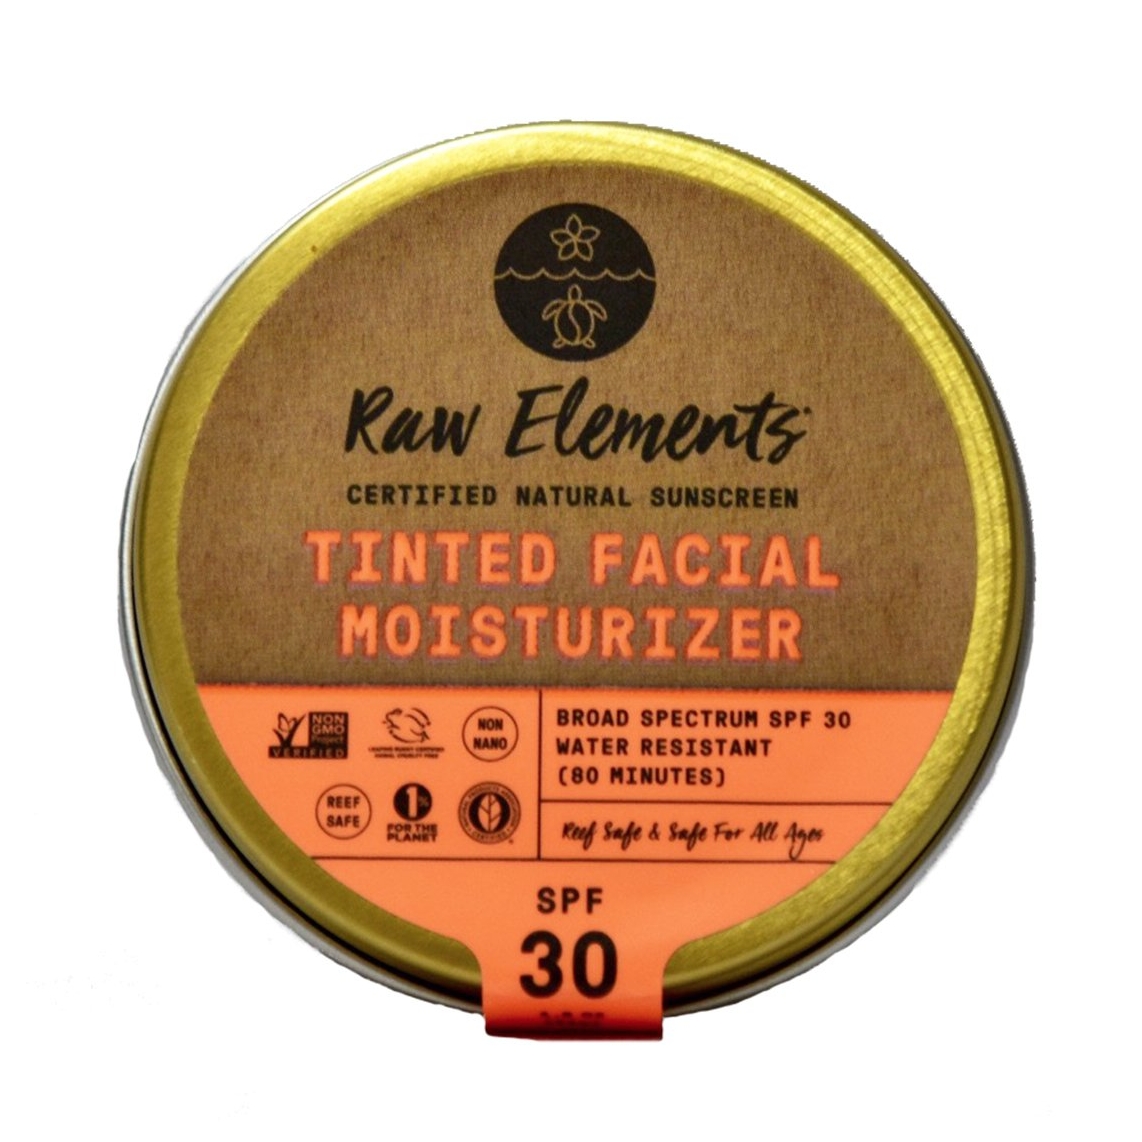 Raw Elements Tinted Facial Moisturizer SPF 30 available at The Choosy Chick